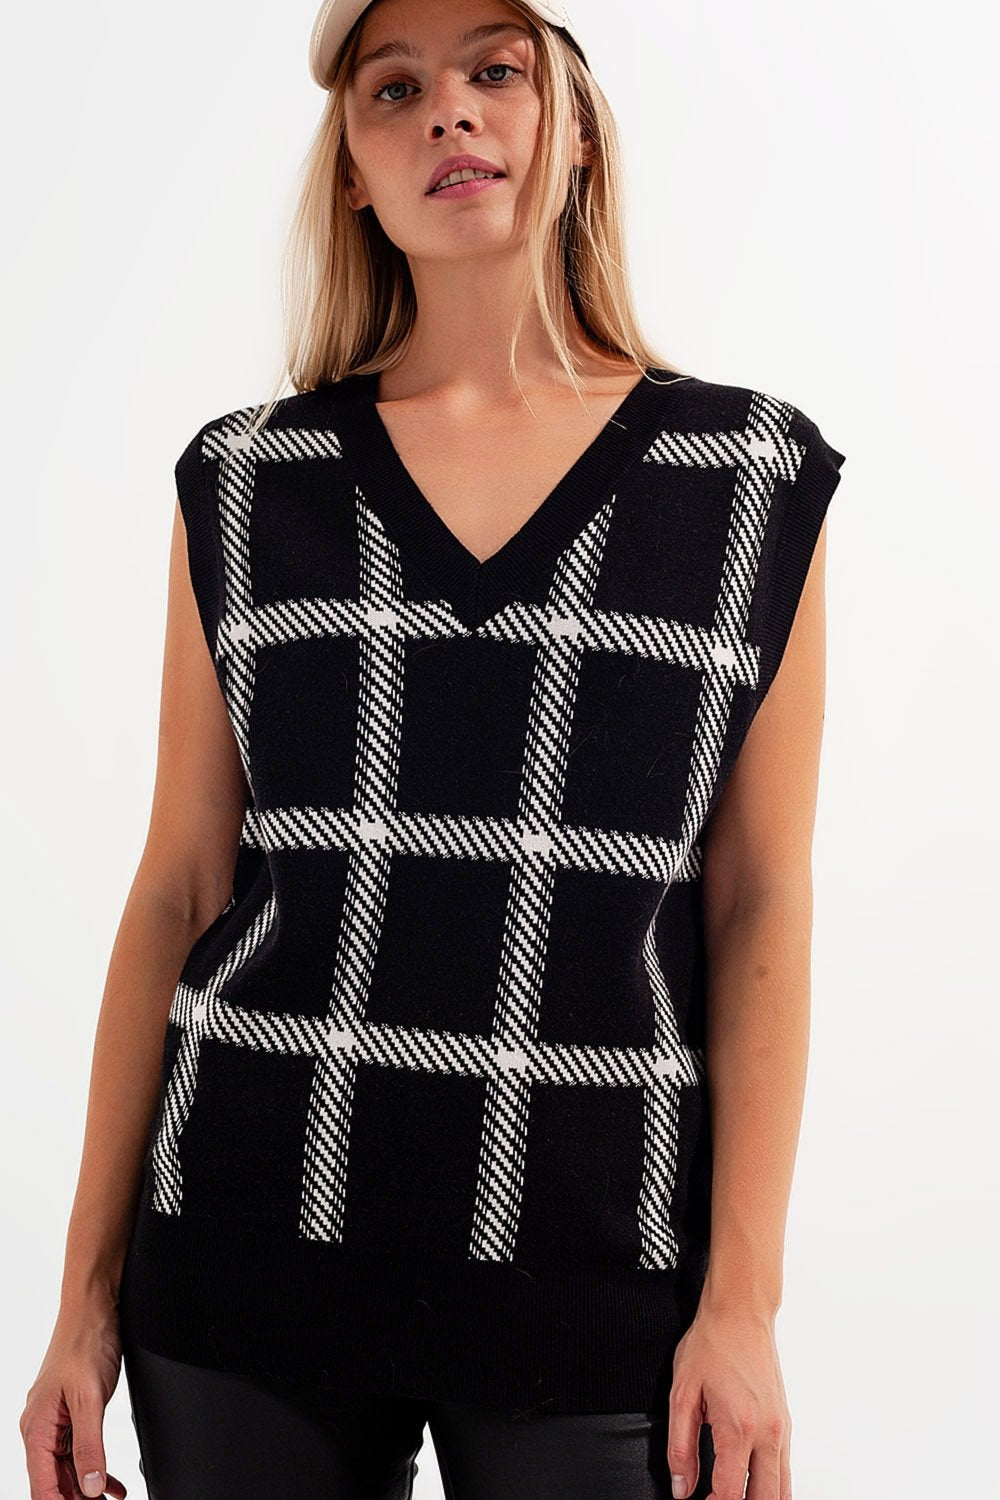 Knitted Vest With Big Crosshatches in Black